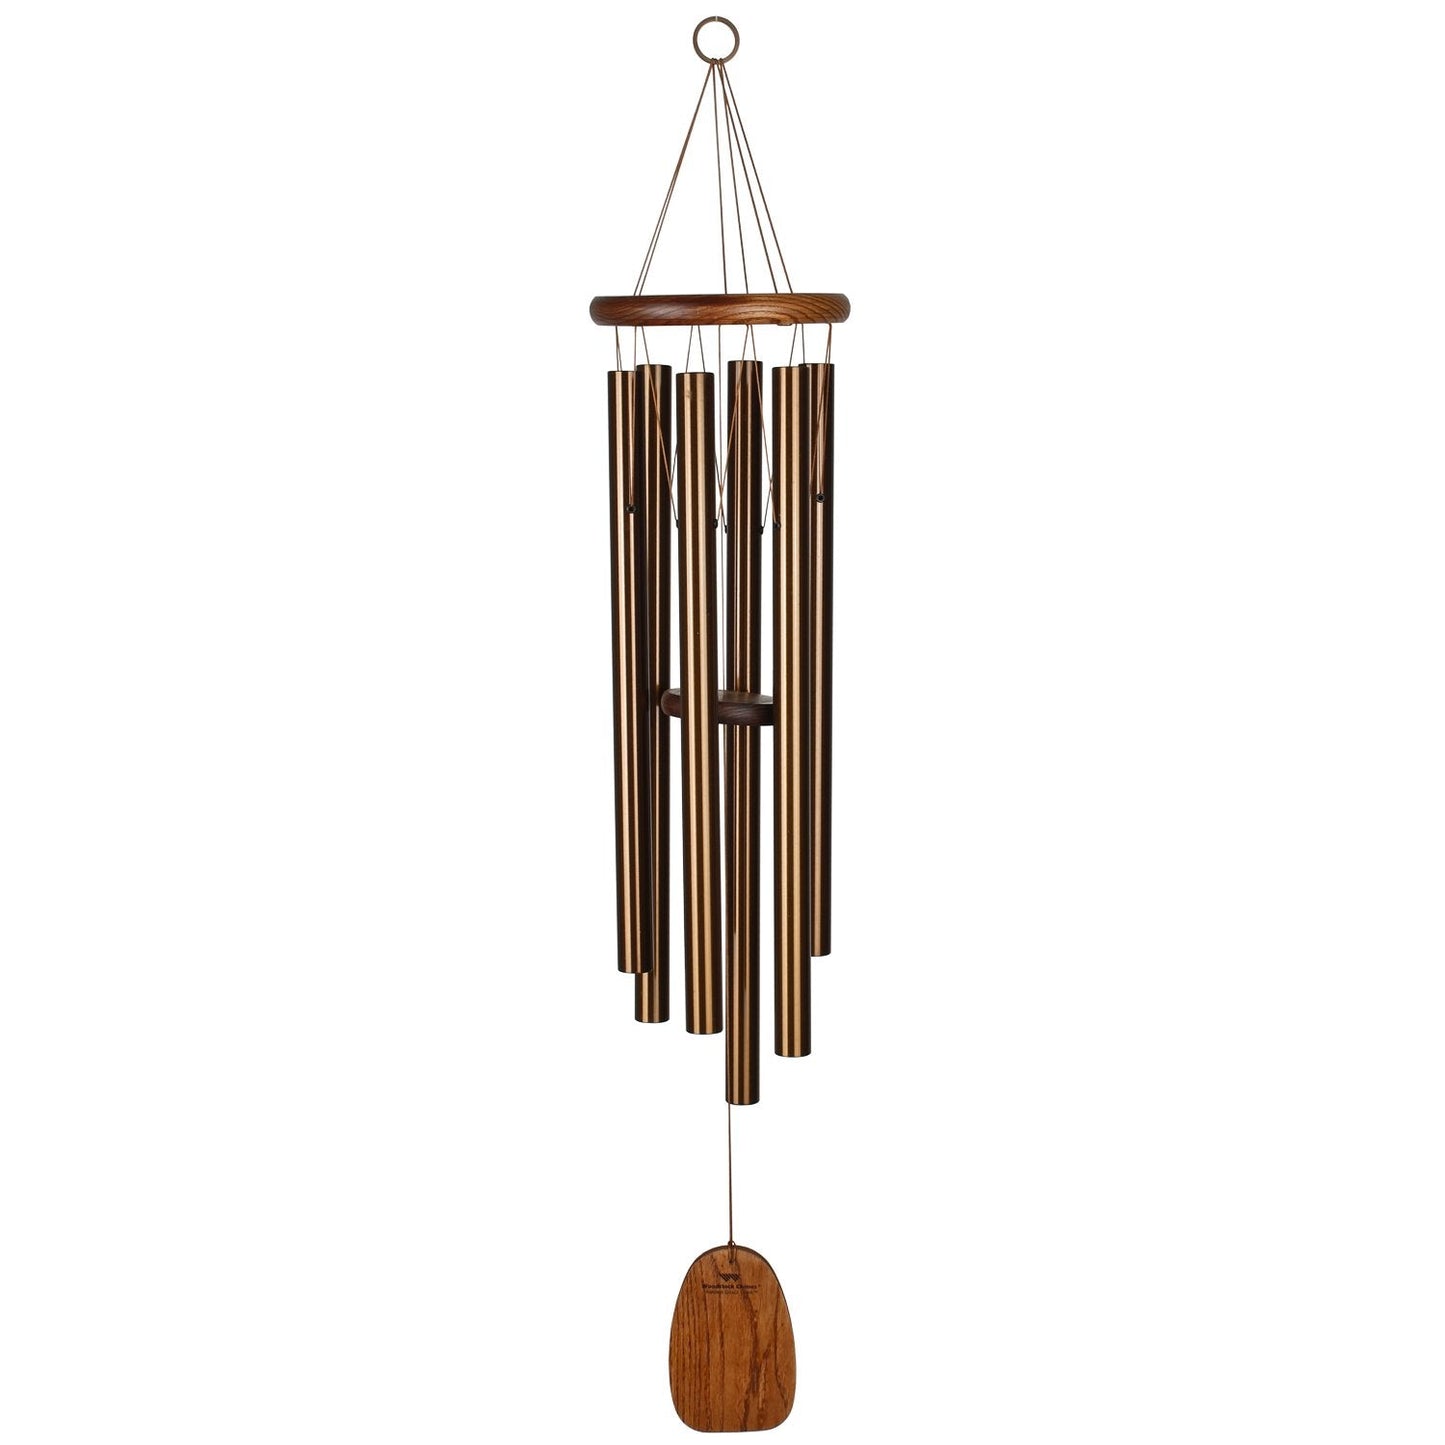 Amazing Grace® Chime - Large, Bronze - by Woodstock Chimes